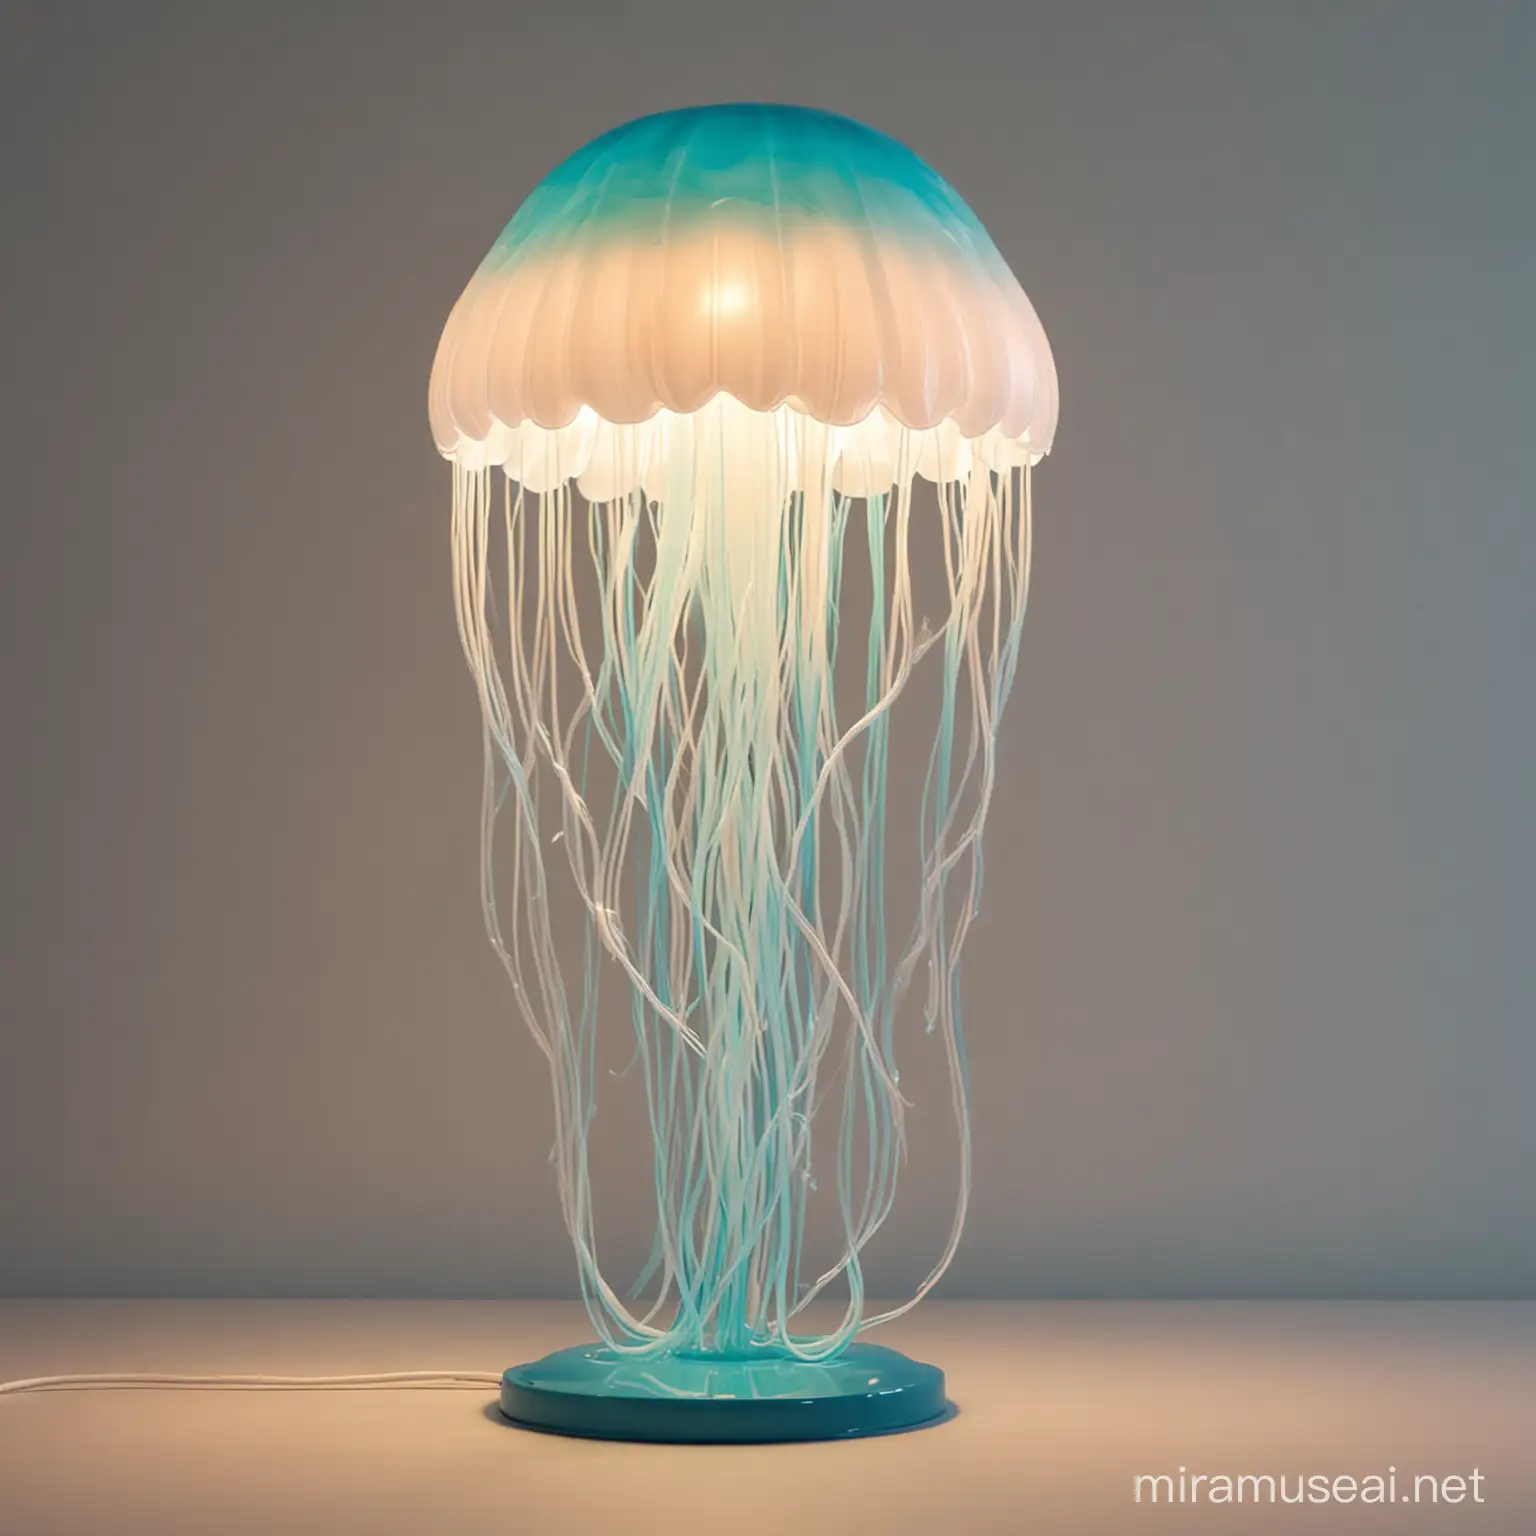 A cool looking lamp that looks like a jellyfish and glows
